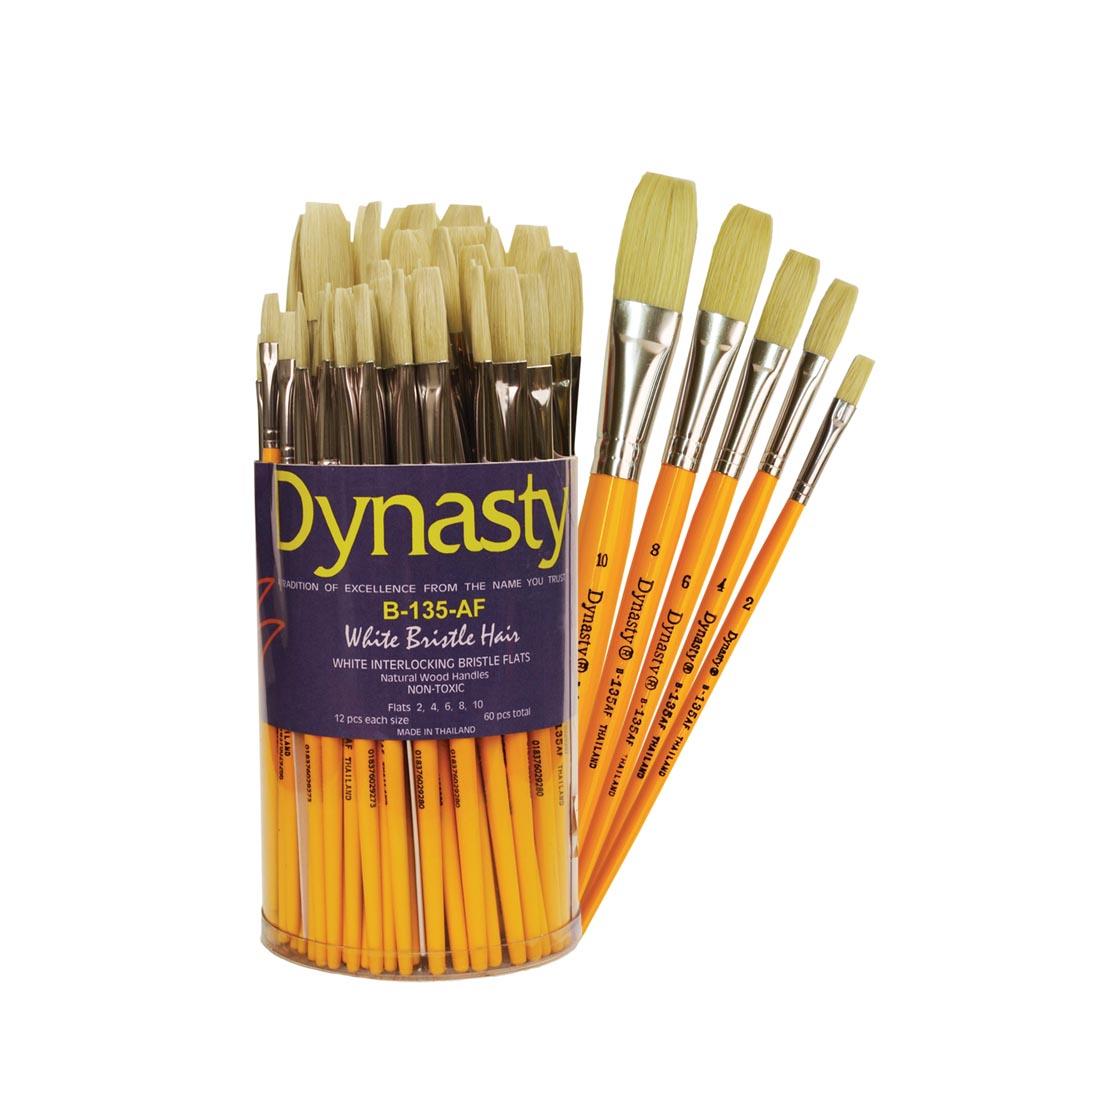 Tub of Dynasty White Bristle Flat Brush Set with the five different sizes showing beside it